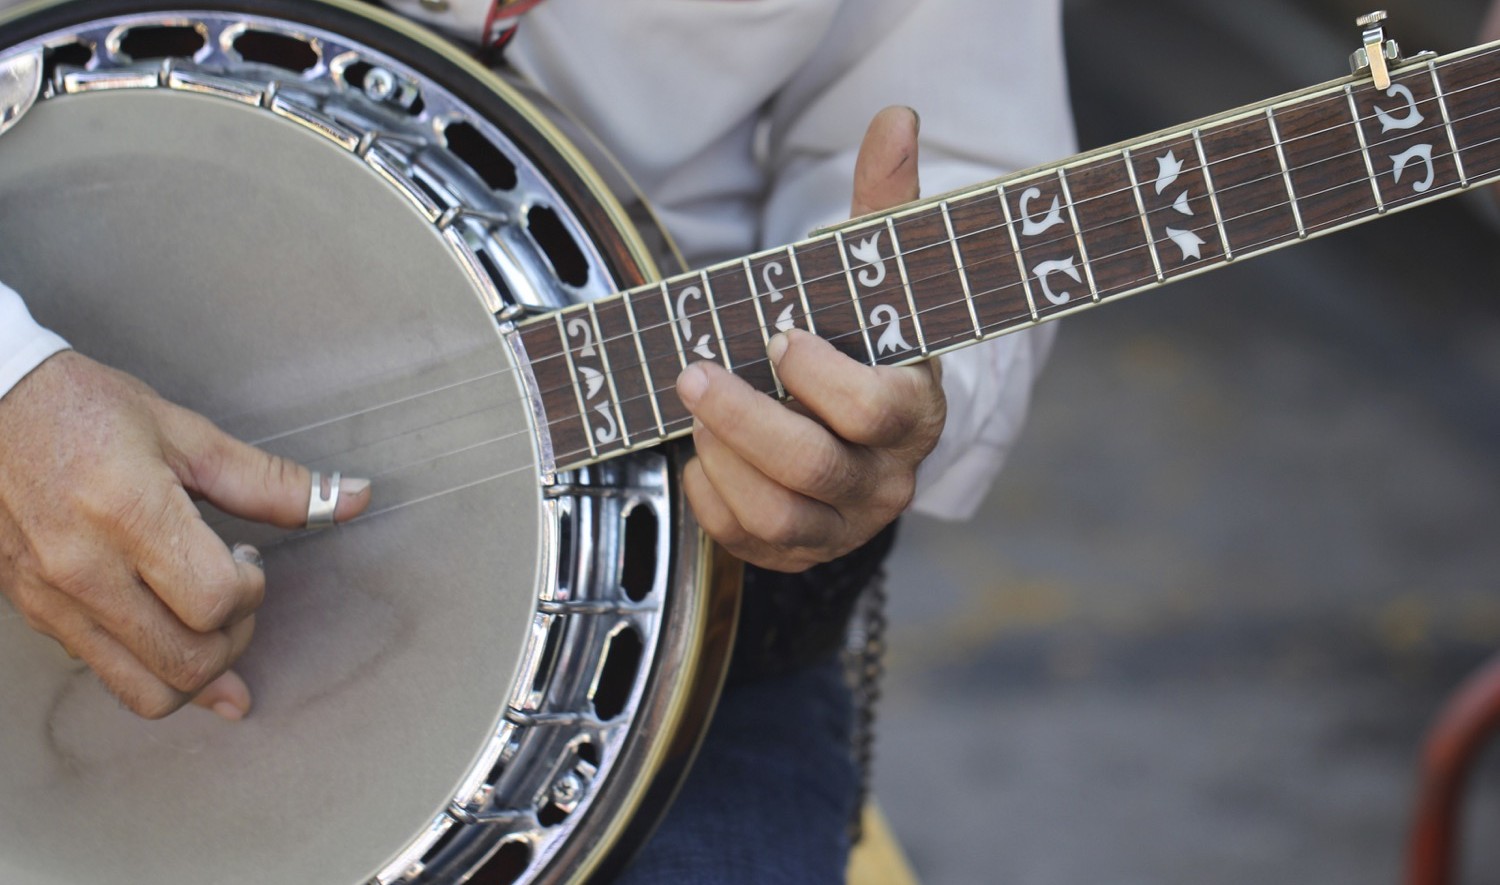 Close up image of a man's hands playing the banjo.